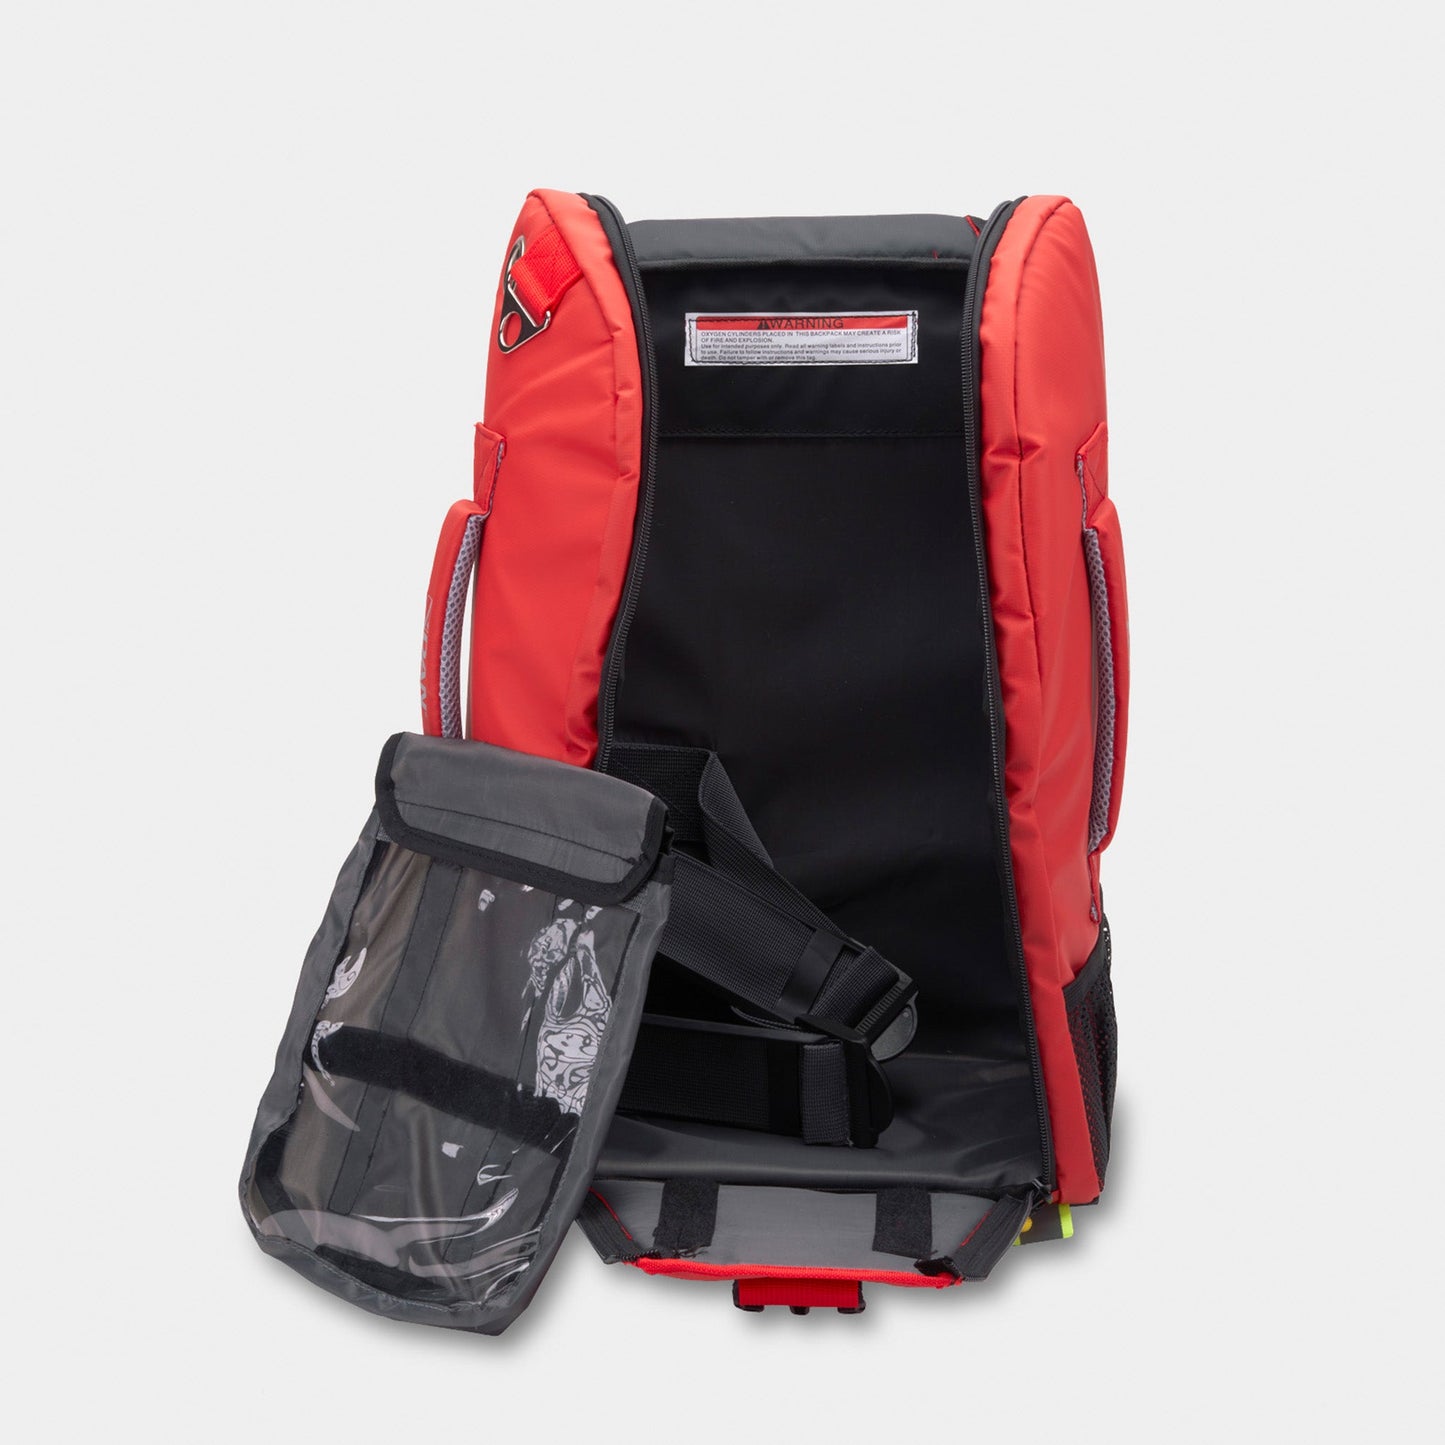 Red First Aid Backpack